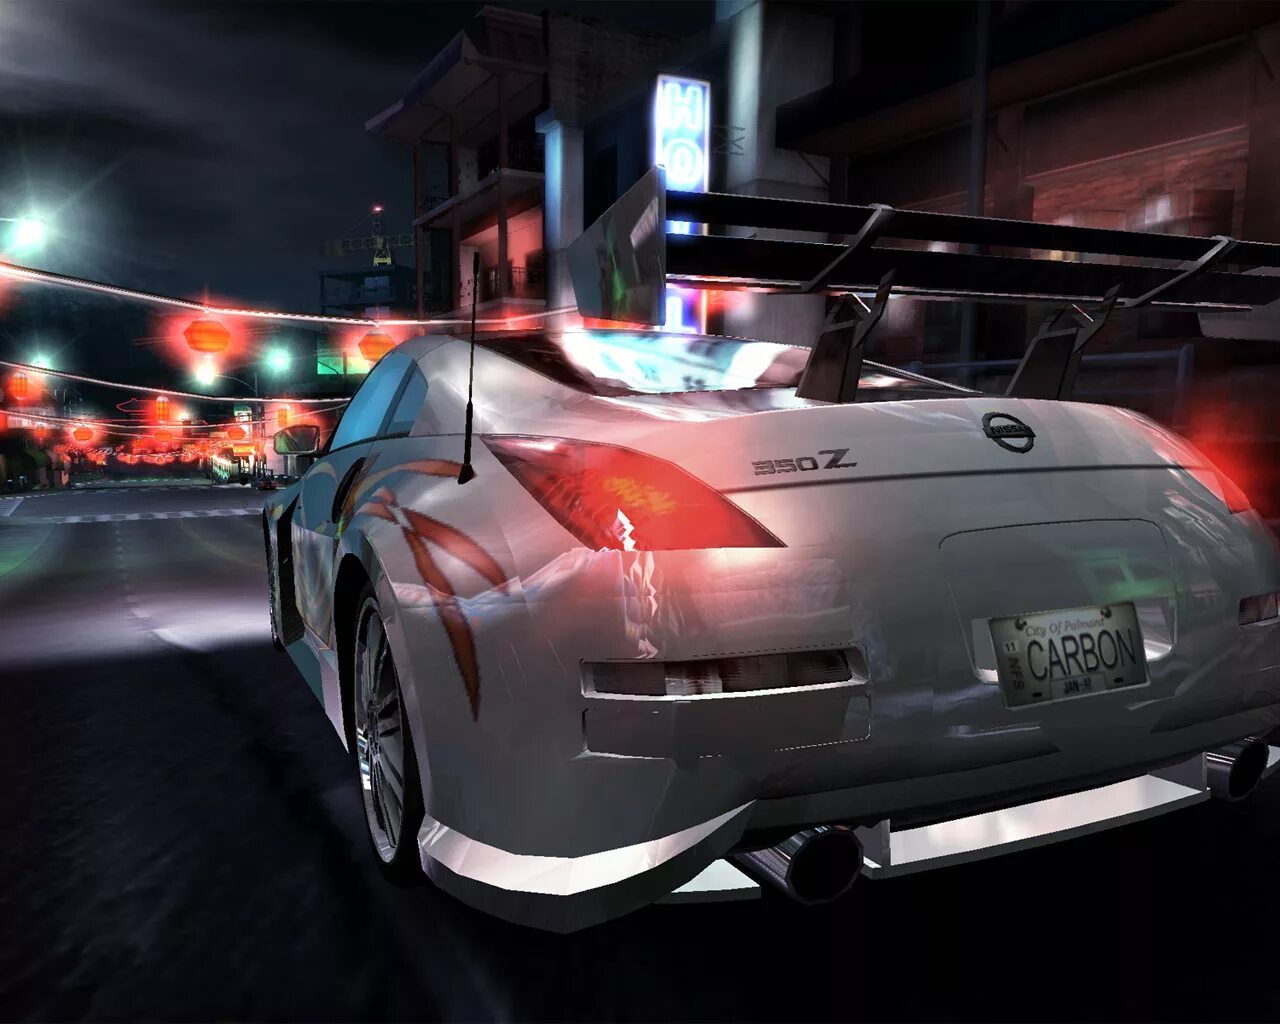 Nissan 350z из need for Speed карбон. Нфс карбон 2. Need for Speed карбон. Nissan 350z NFS.